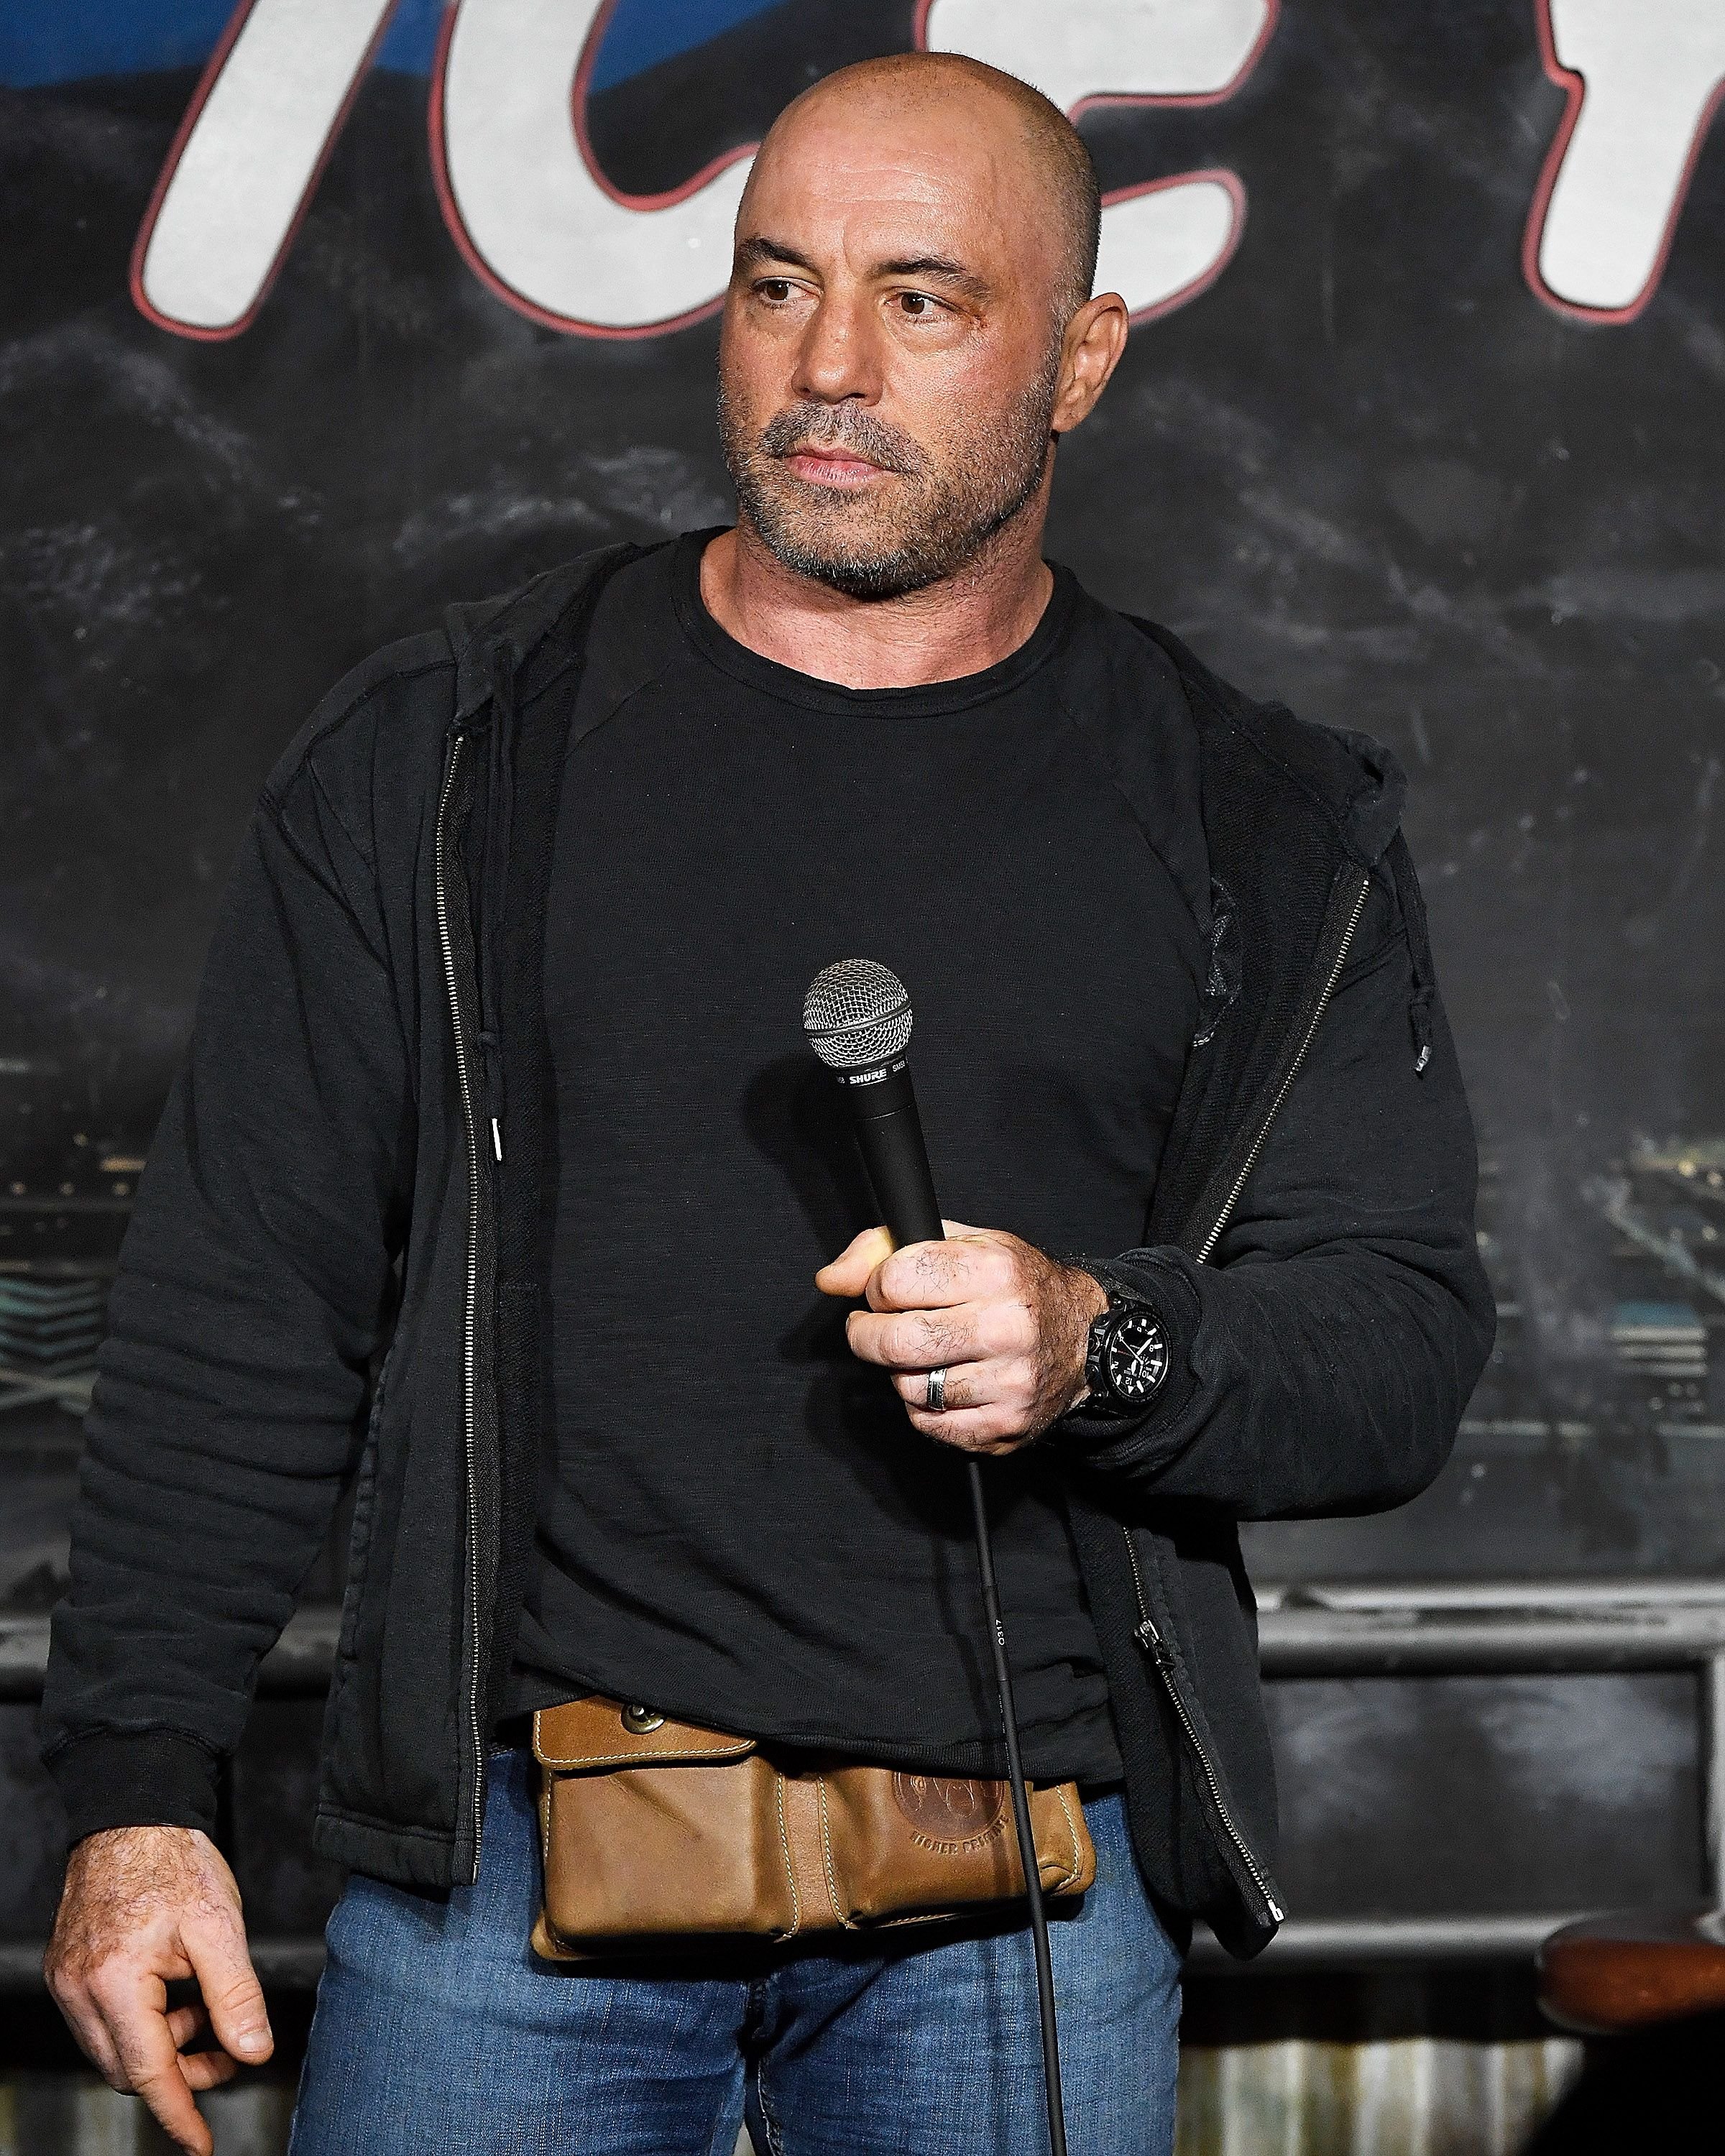 Joe Rogan at The Ice House Comedy Club on July 11, 2018, in Pasadena, California. | Source: Getty Images